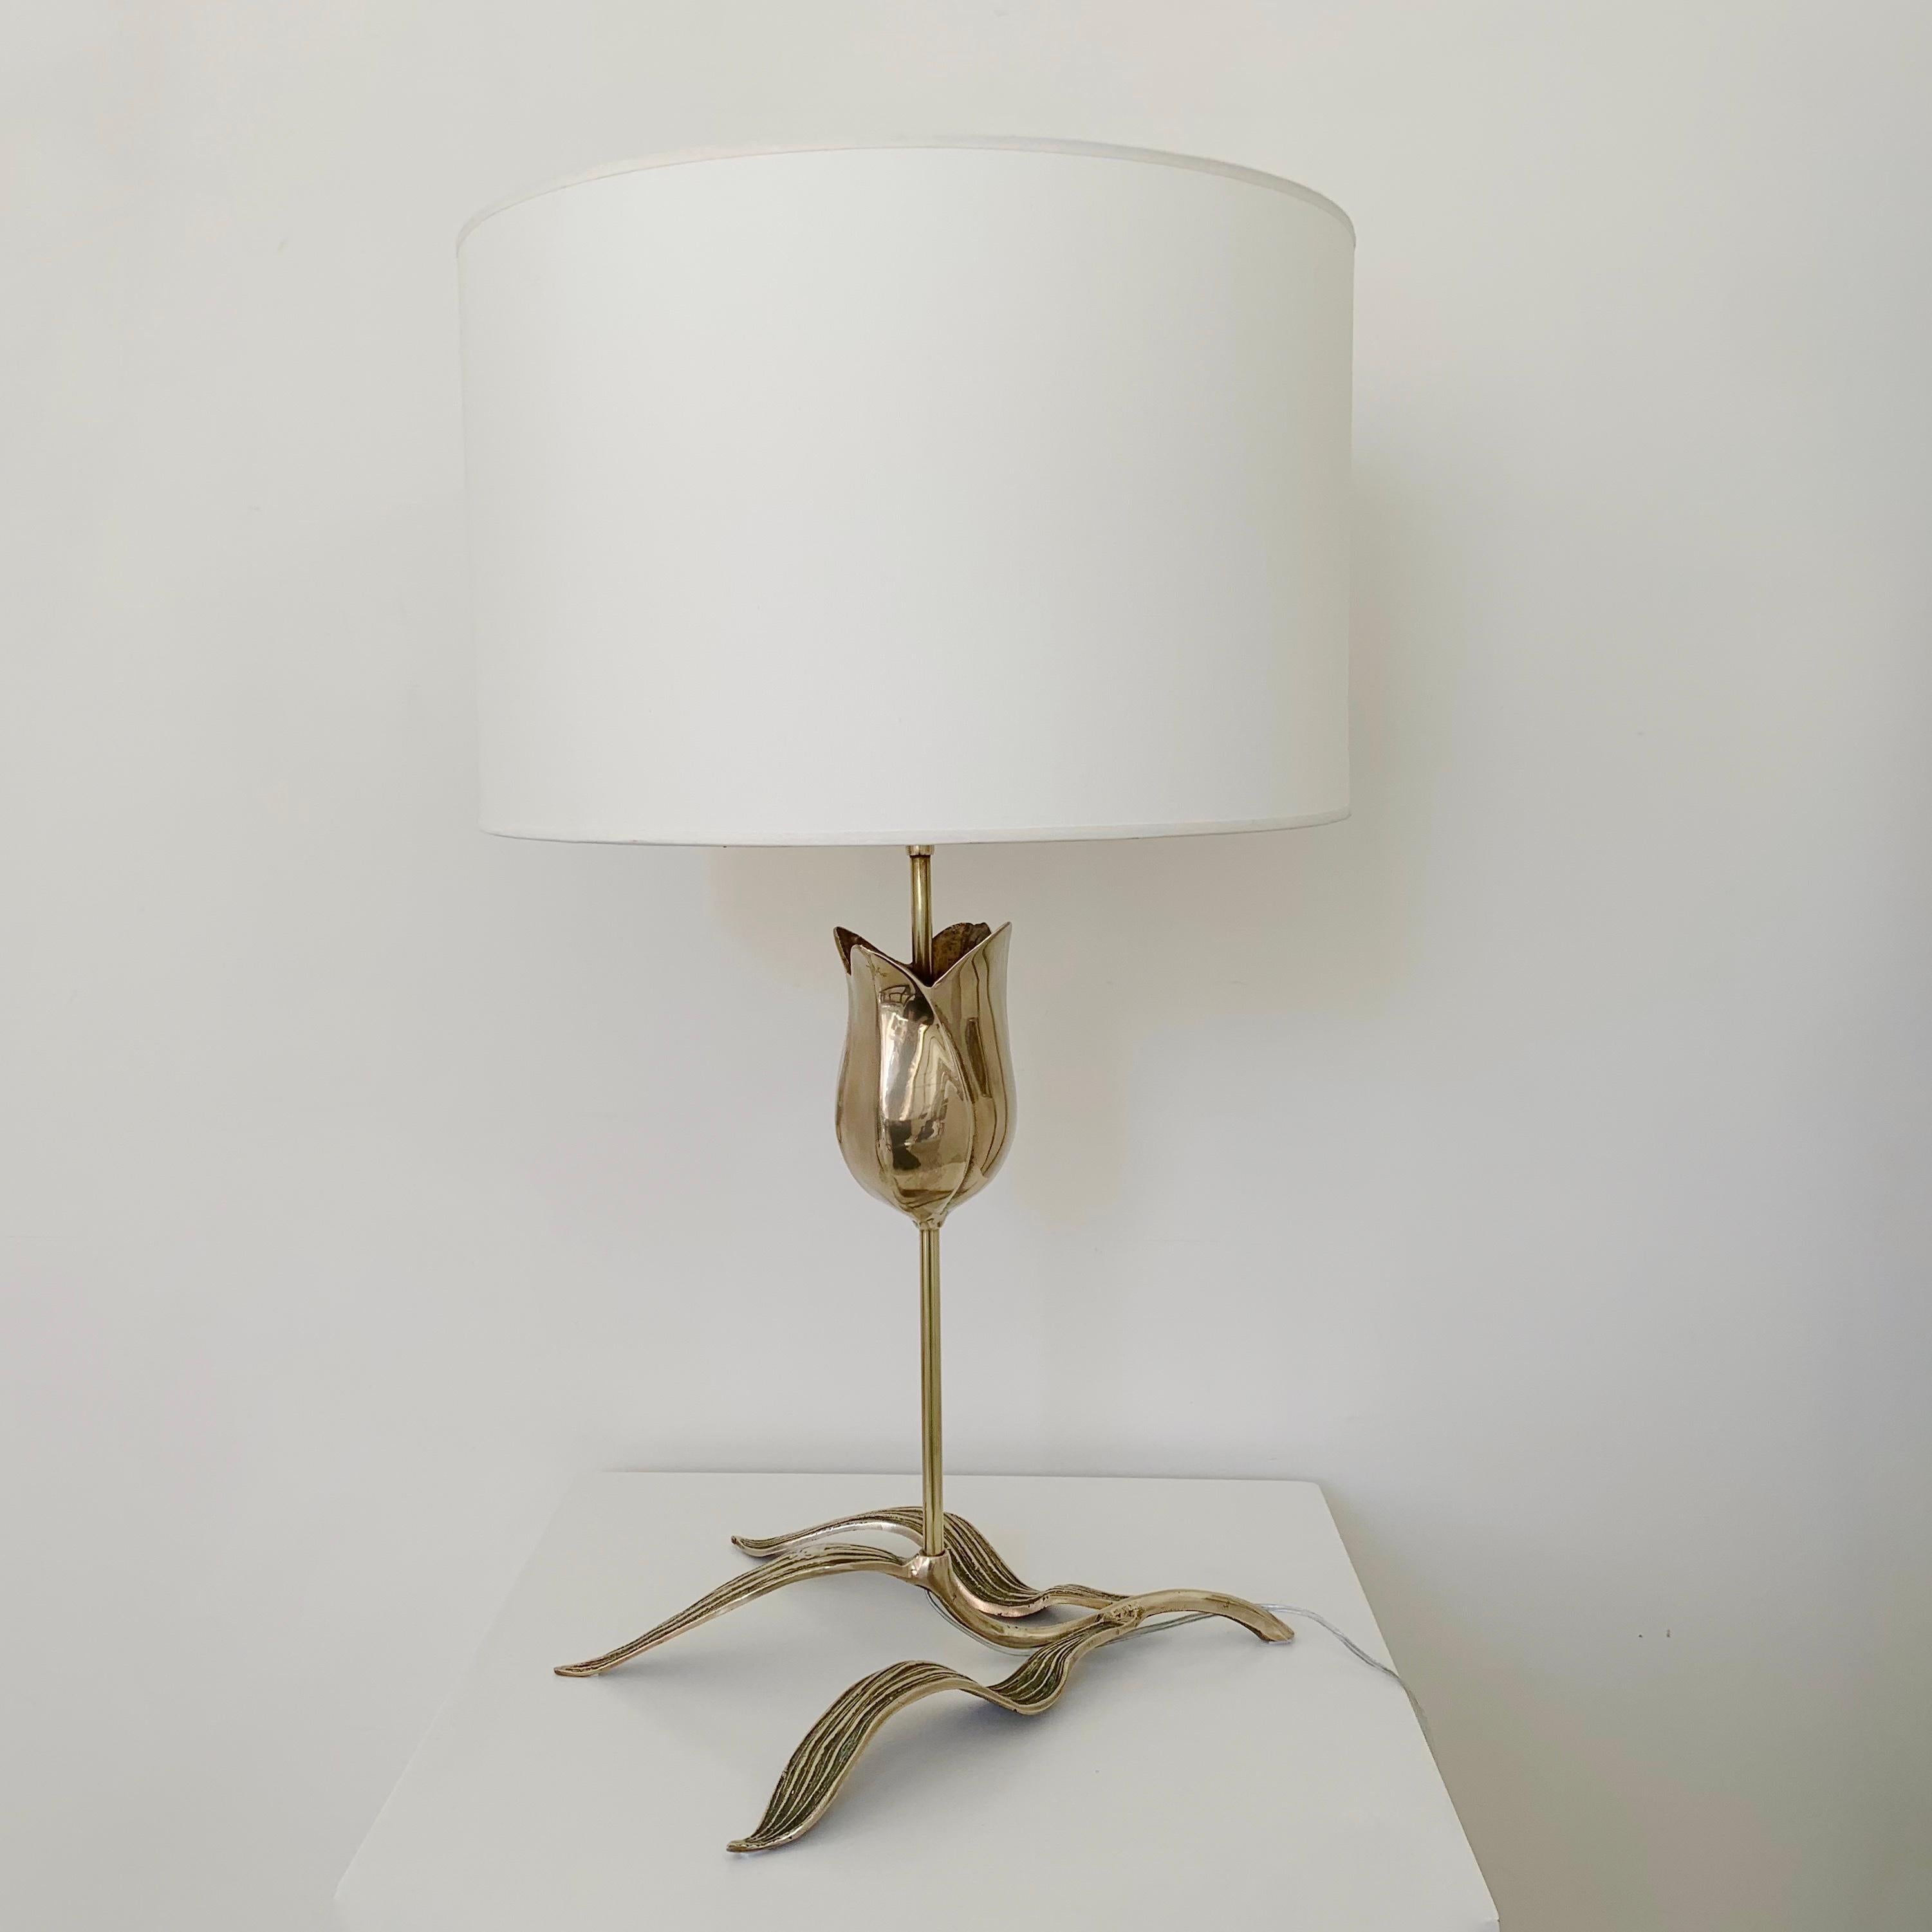 Elegant mid-century decorative flower and leaves table lamp, circa 1970, France.
Bronze, white fabric shade.
Dimensions: 68 cm: total height, diameter of the shade: 40 cm.
Nice model in good condition.
All purchases are covered by our Buyer